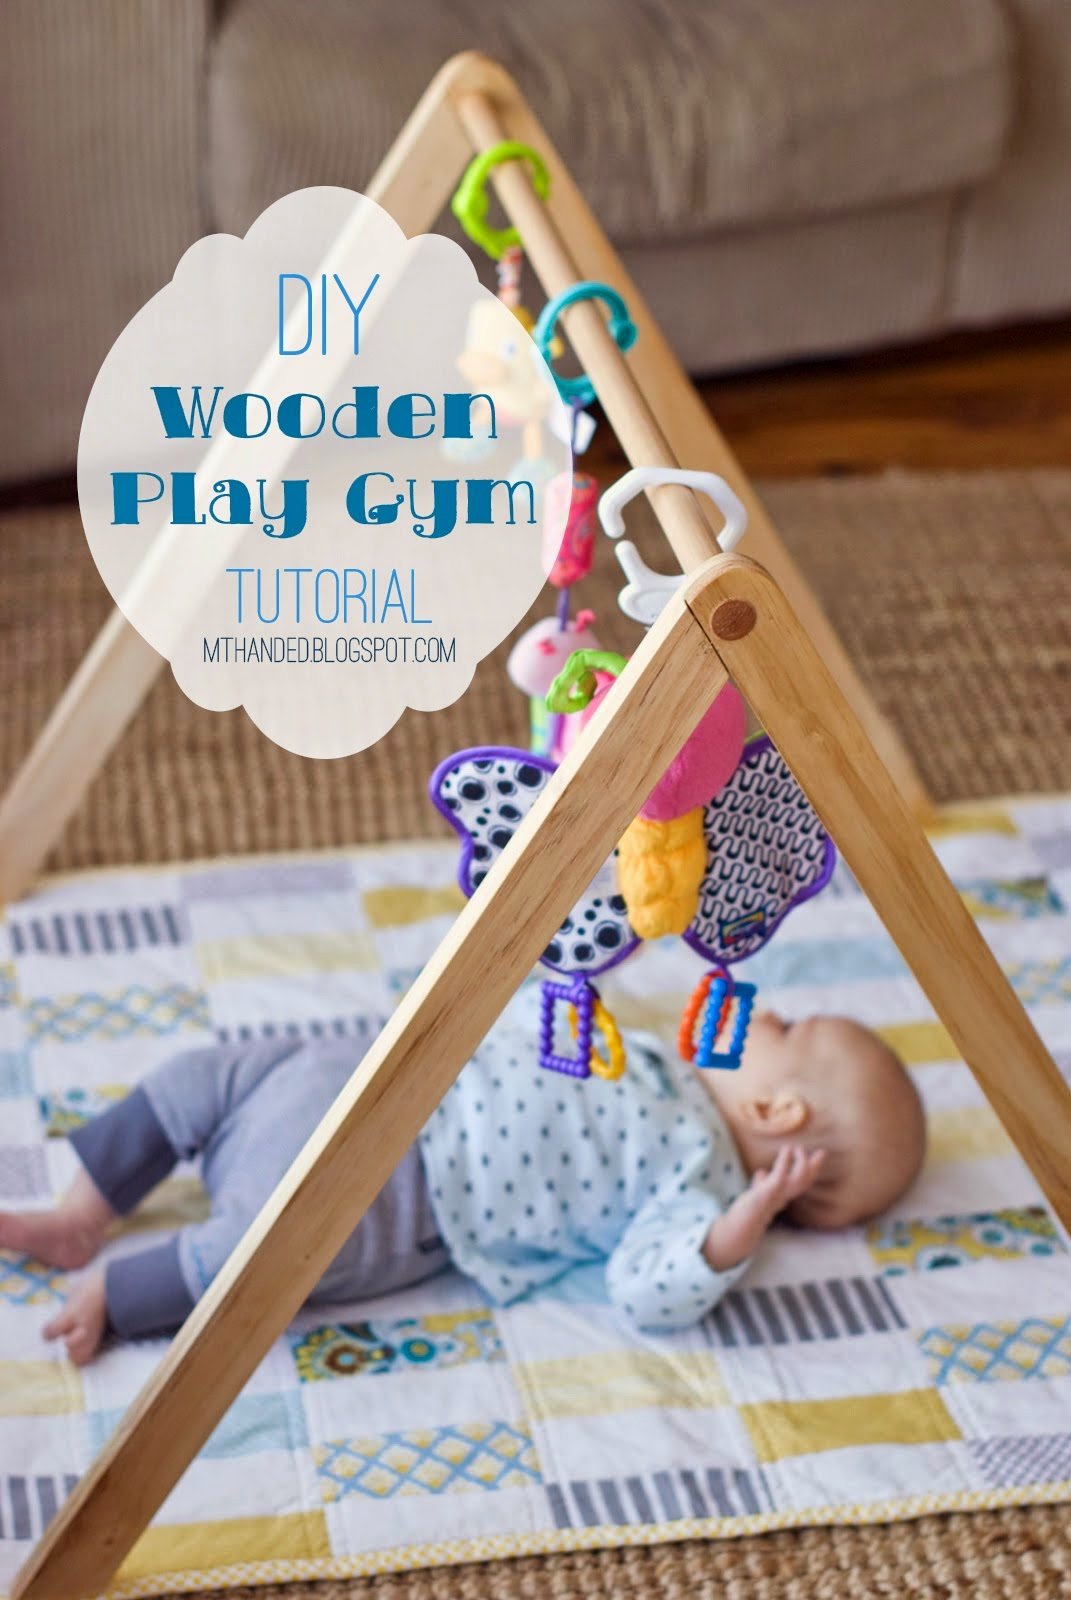 Helping Kids Grow Up: How To Make Your Own Wooden Play Gym ...